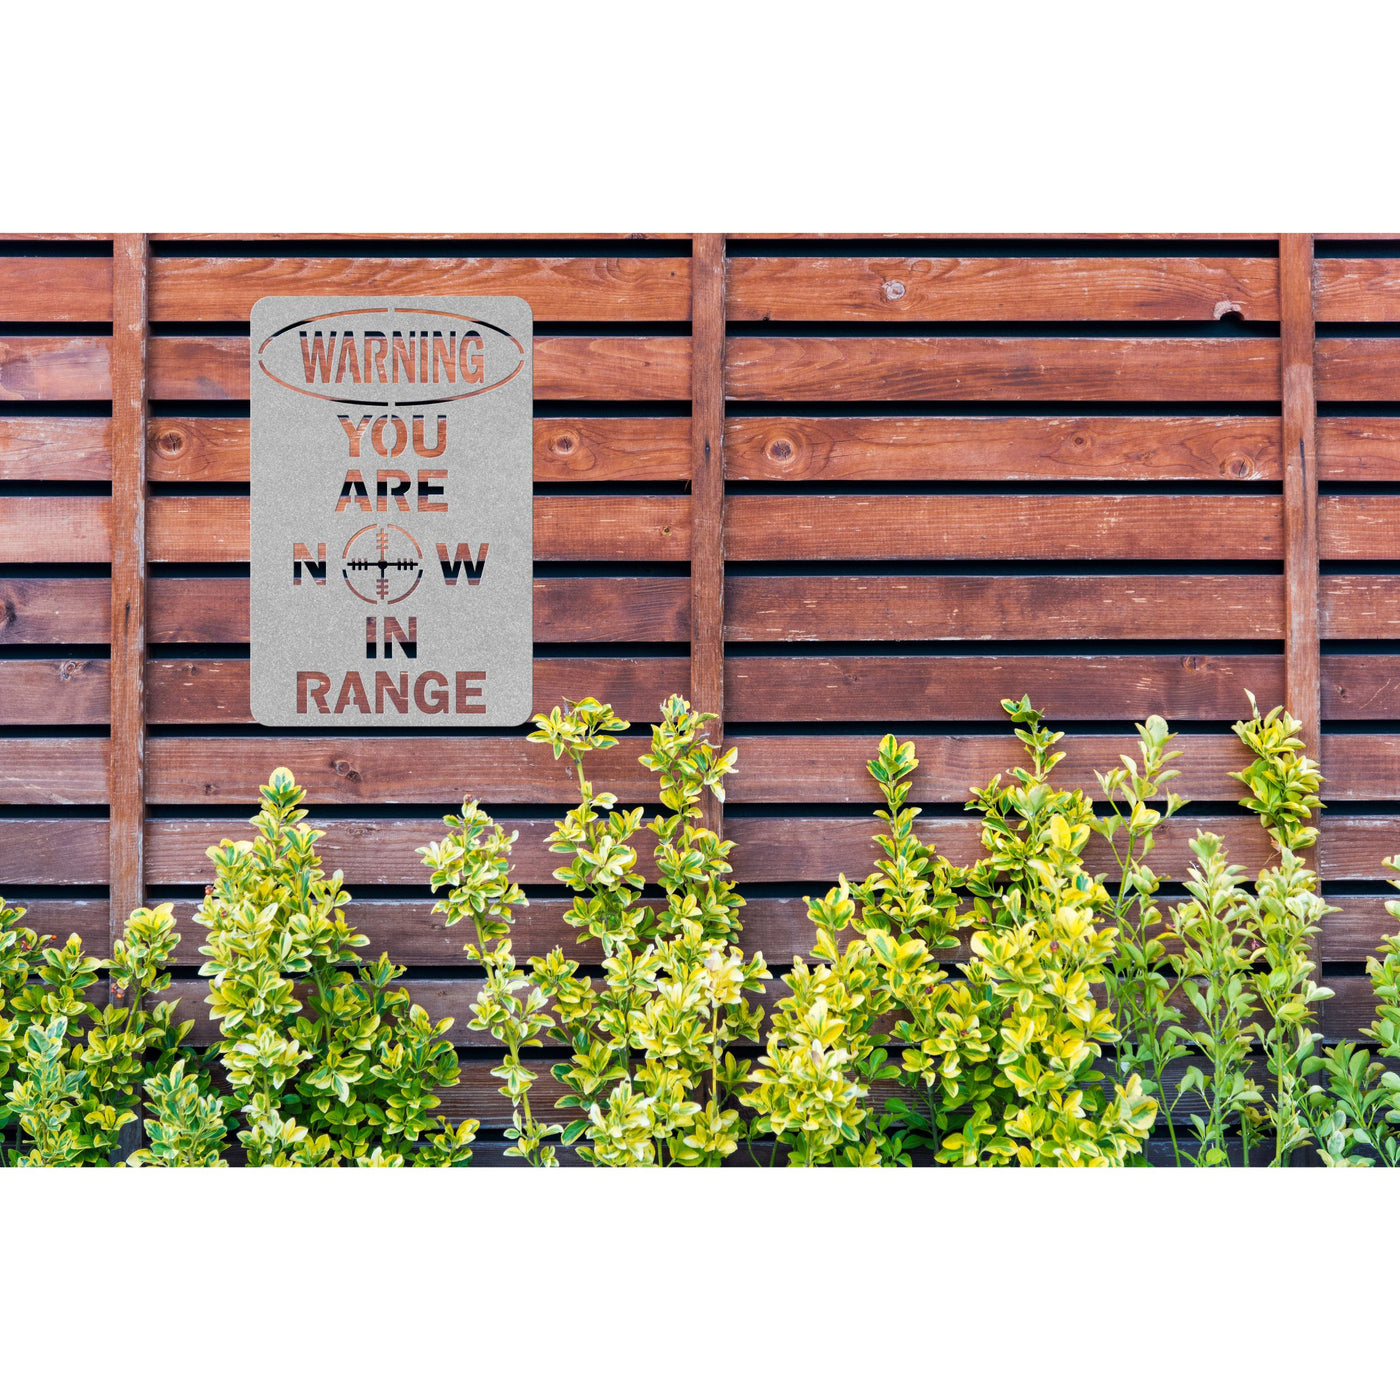 You Are Now In Range - Security Prevention Metal Sign